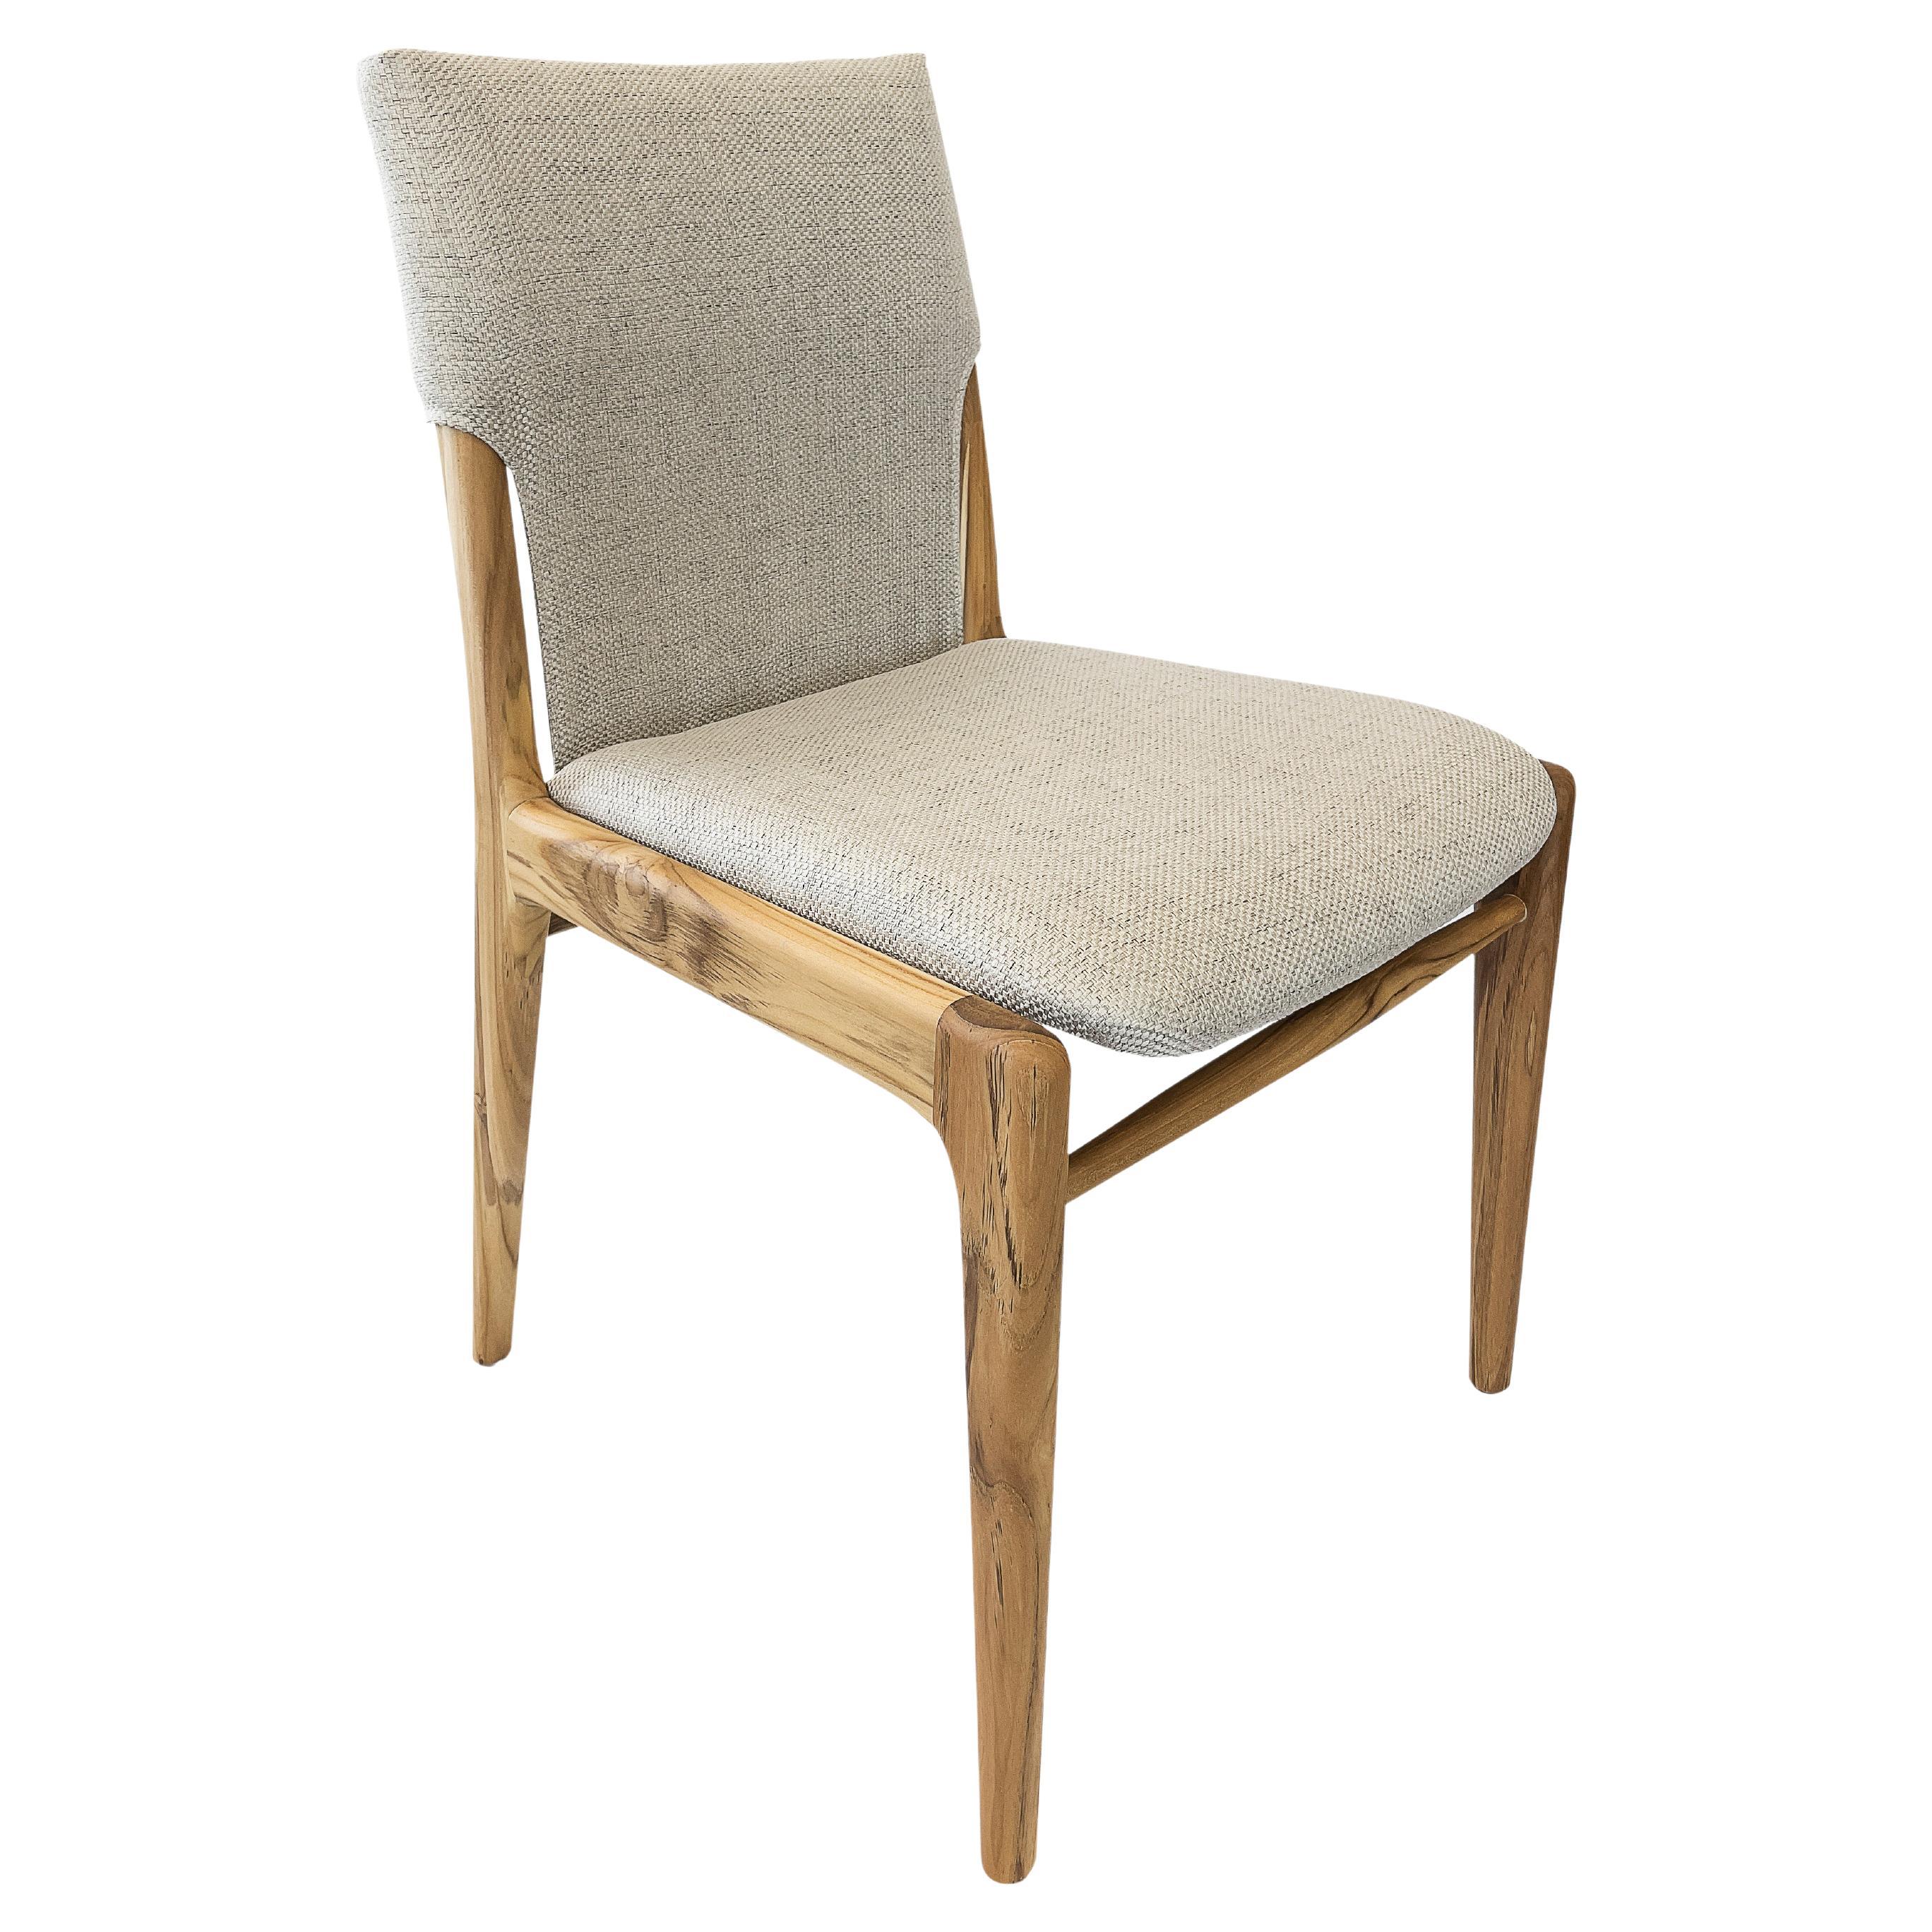 Legendary Uultis designer Mr. Sergio Batista has created the Tress dining chair in a light fabric upholstered and a teak wood finish. His creations are synonymous with style, elegance, comfort, and quality. With the Tress chair, Mr. Batista has